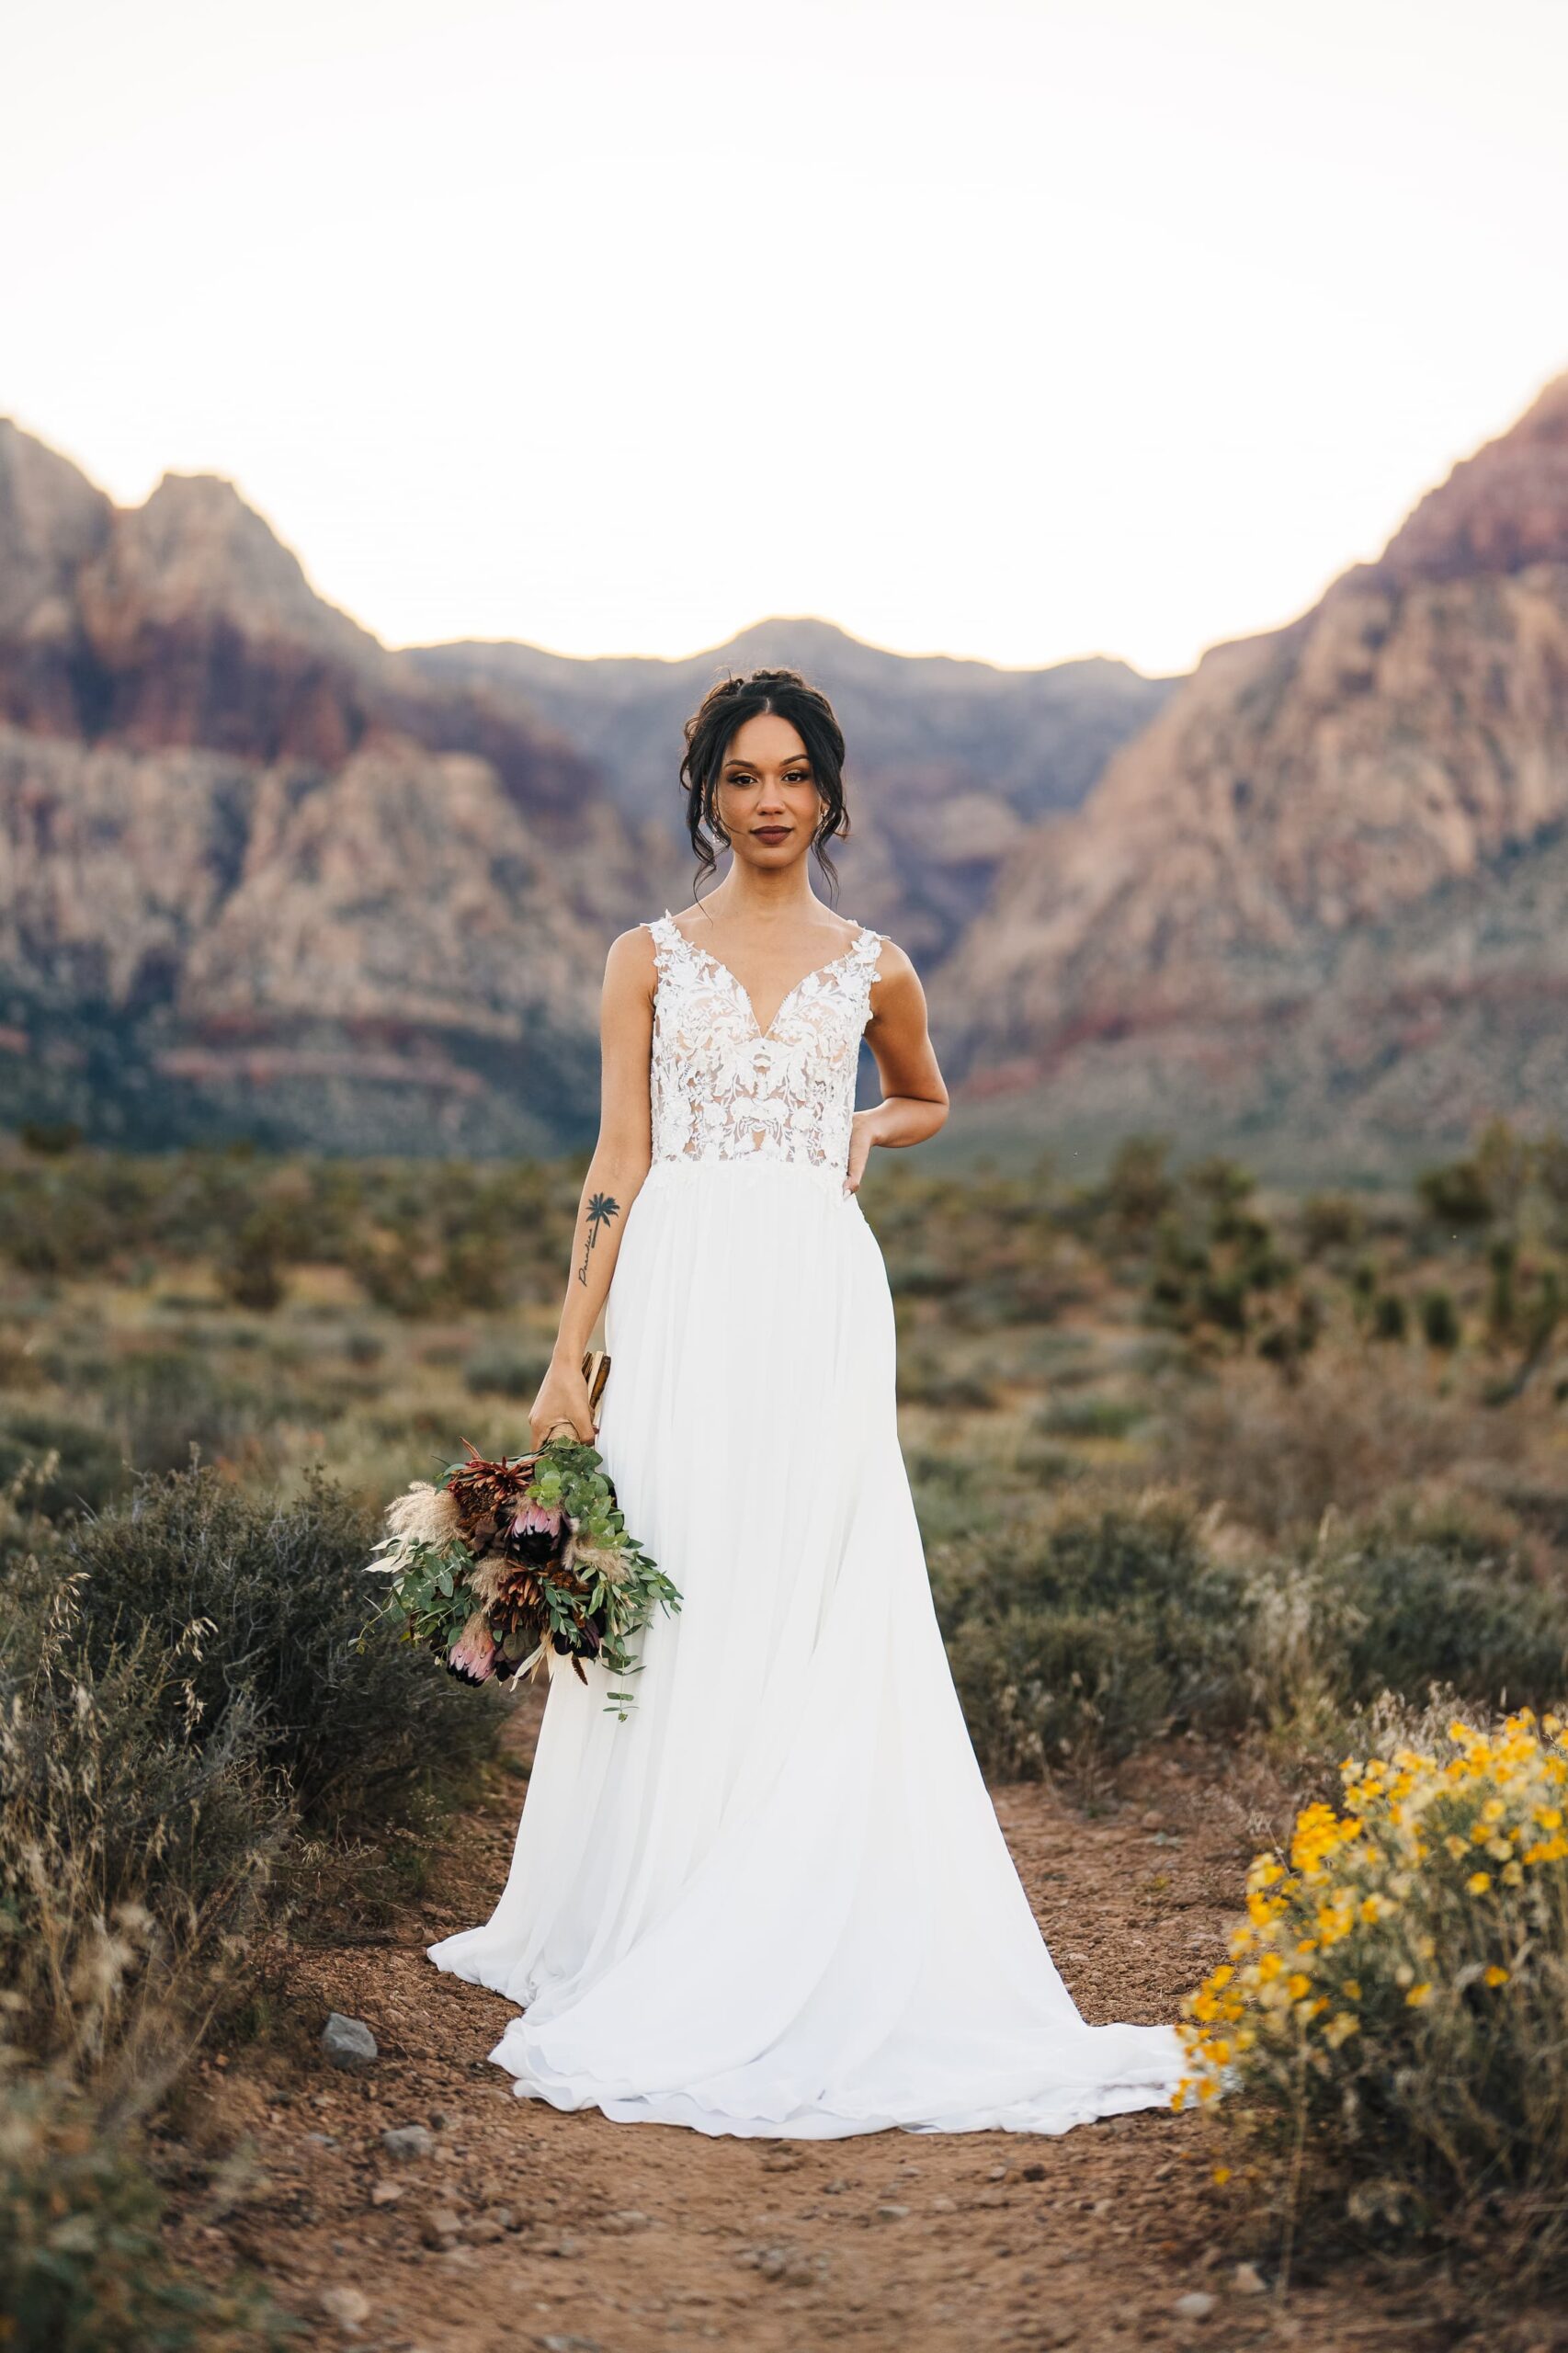 Bride wearing a beautiful wedding dress and holding a bouquet of flowers during her elopement in red rock canyon at Las vegas.